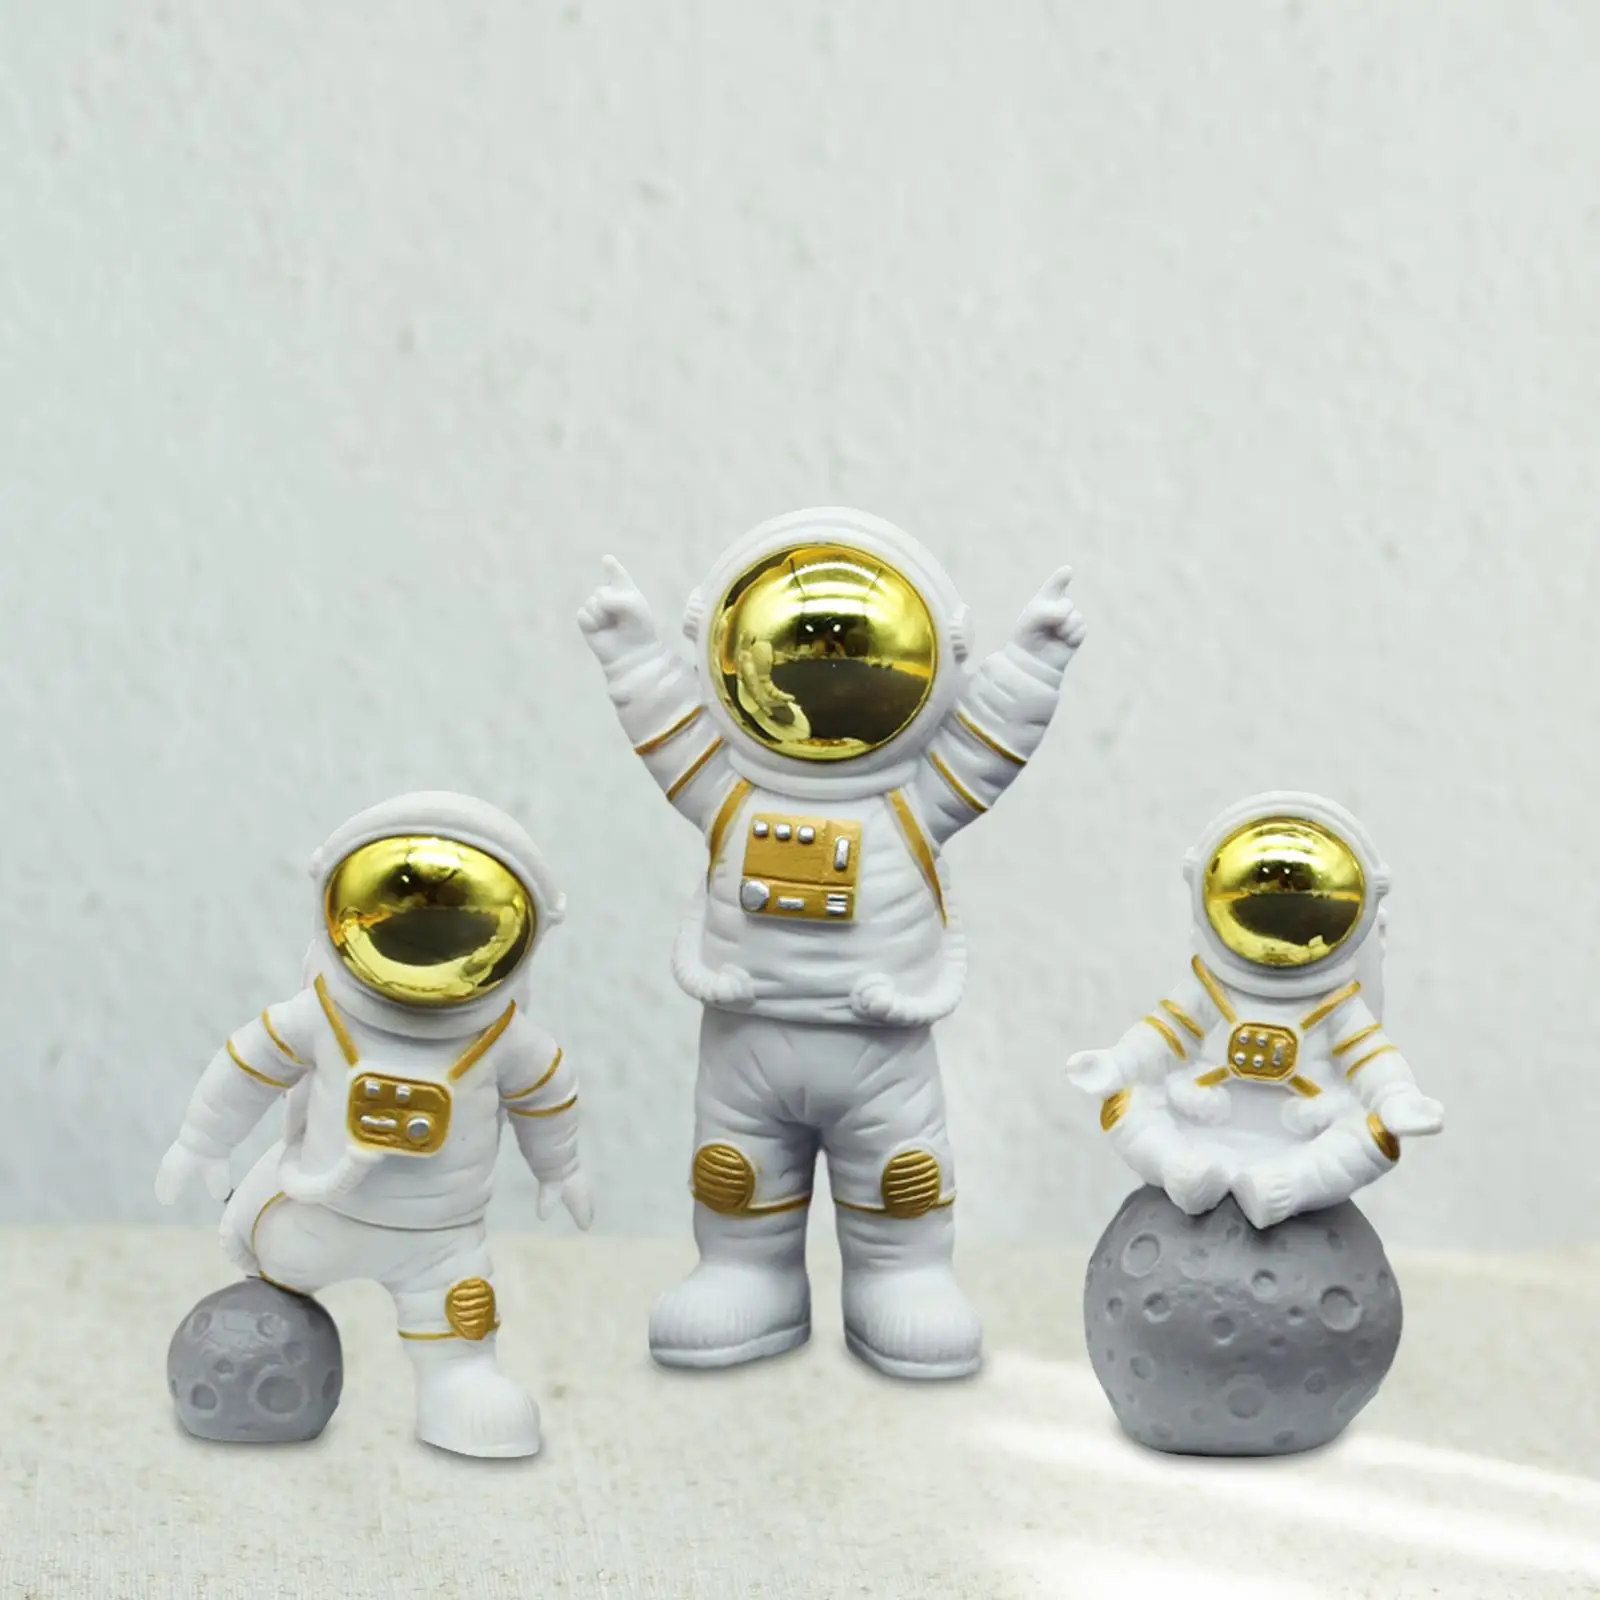 3Pcs Astronaut Statues spaceman Toys Spaceman Ornaments Astronaut Cake Toppers for Bookshelves Car Dashboard decor Crafts